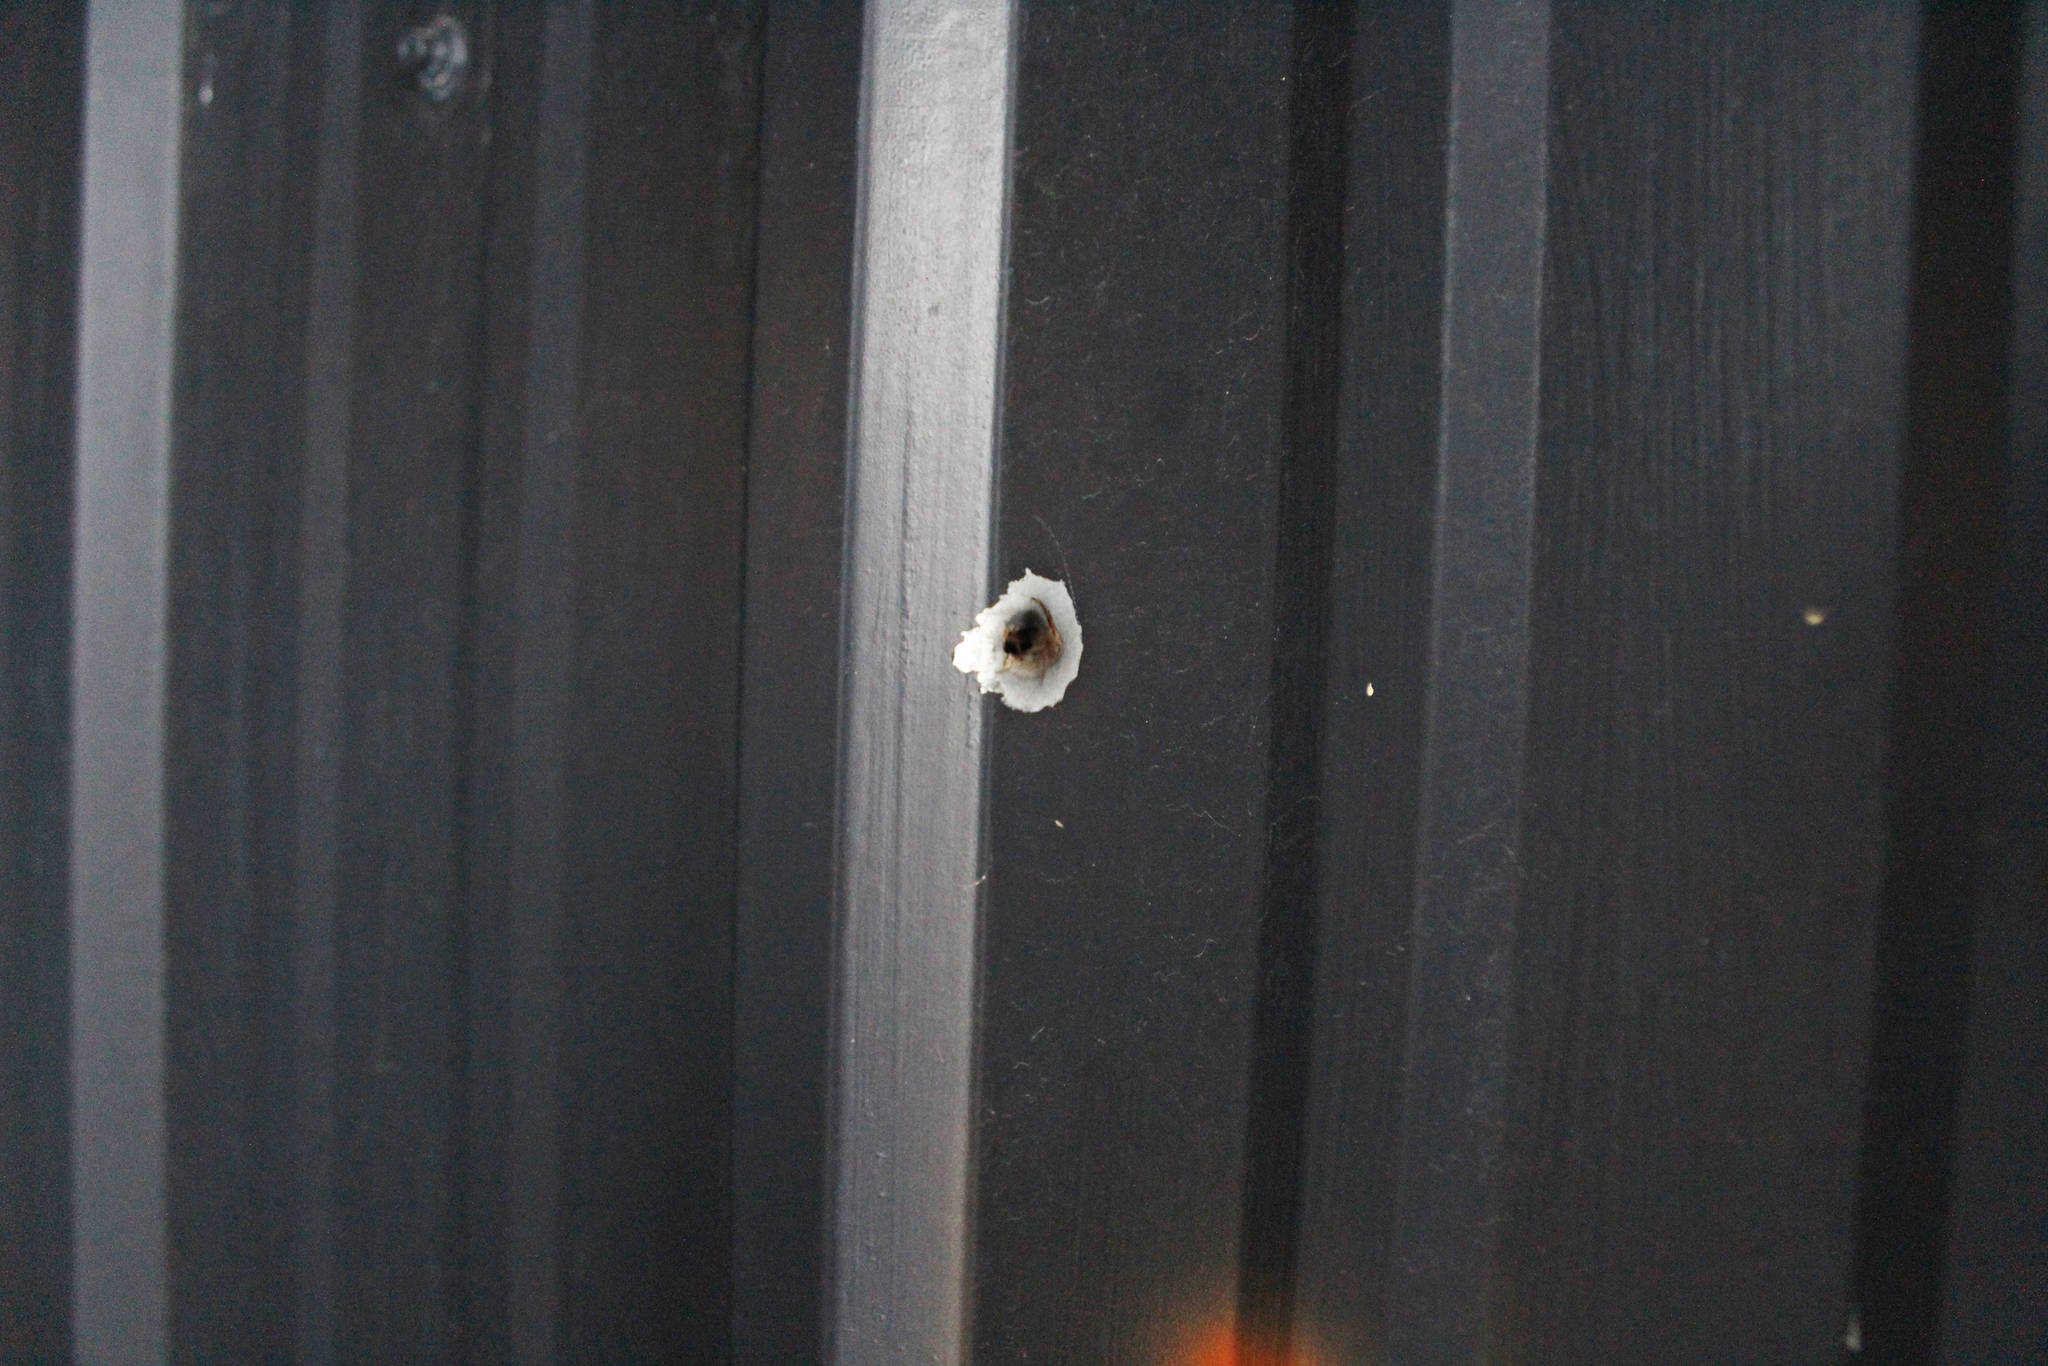 A bullet hole penetrates one of the outside walls of Wasabi’s Bistro from a vandalism incident a few years ago, shown here on Thursday, March 21, 2019 just outside of Homer, Alaska. This is one of several incidents of racist attacks agains the owners of the bistro. (Photo by Megan Pacer/Homer News)